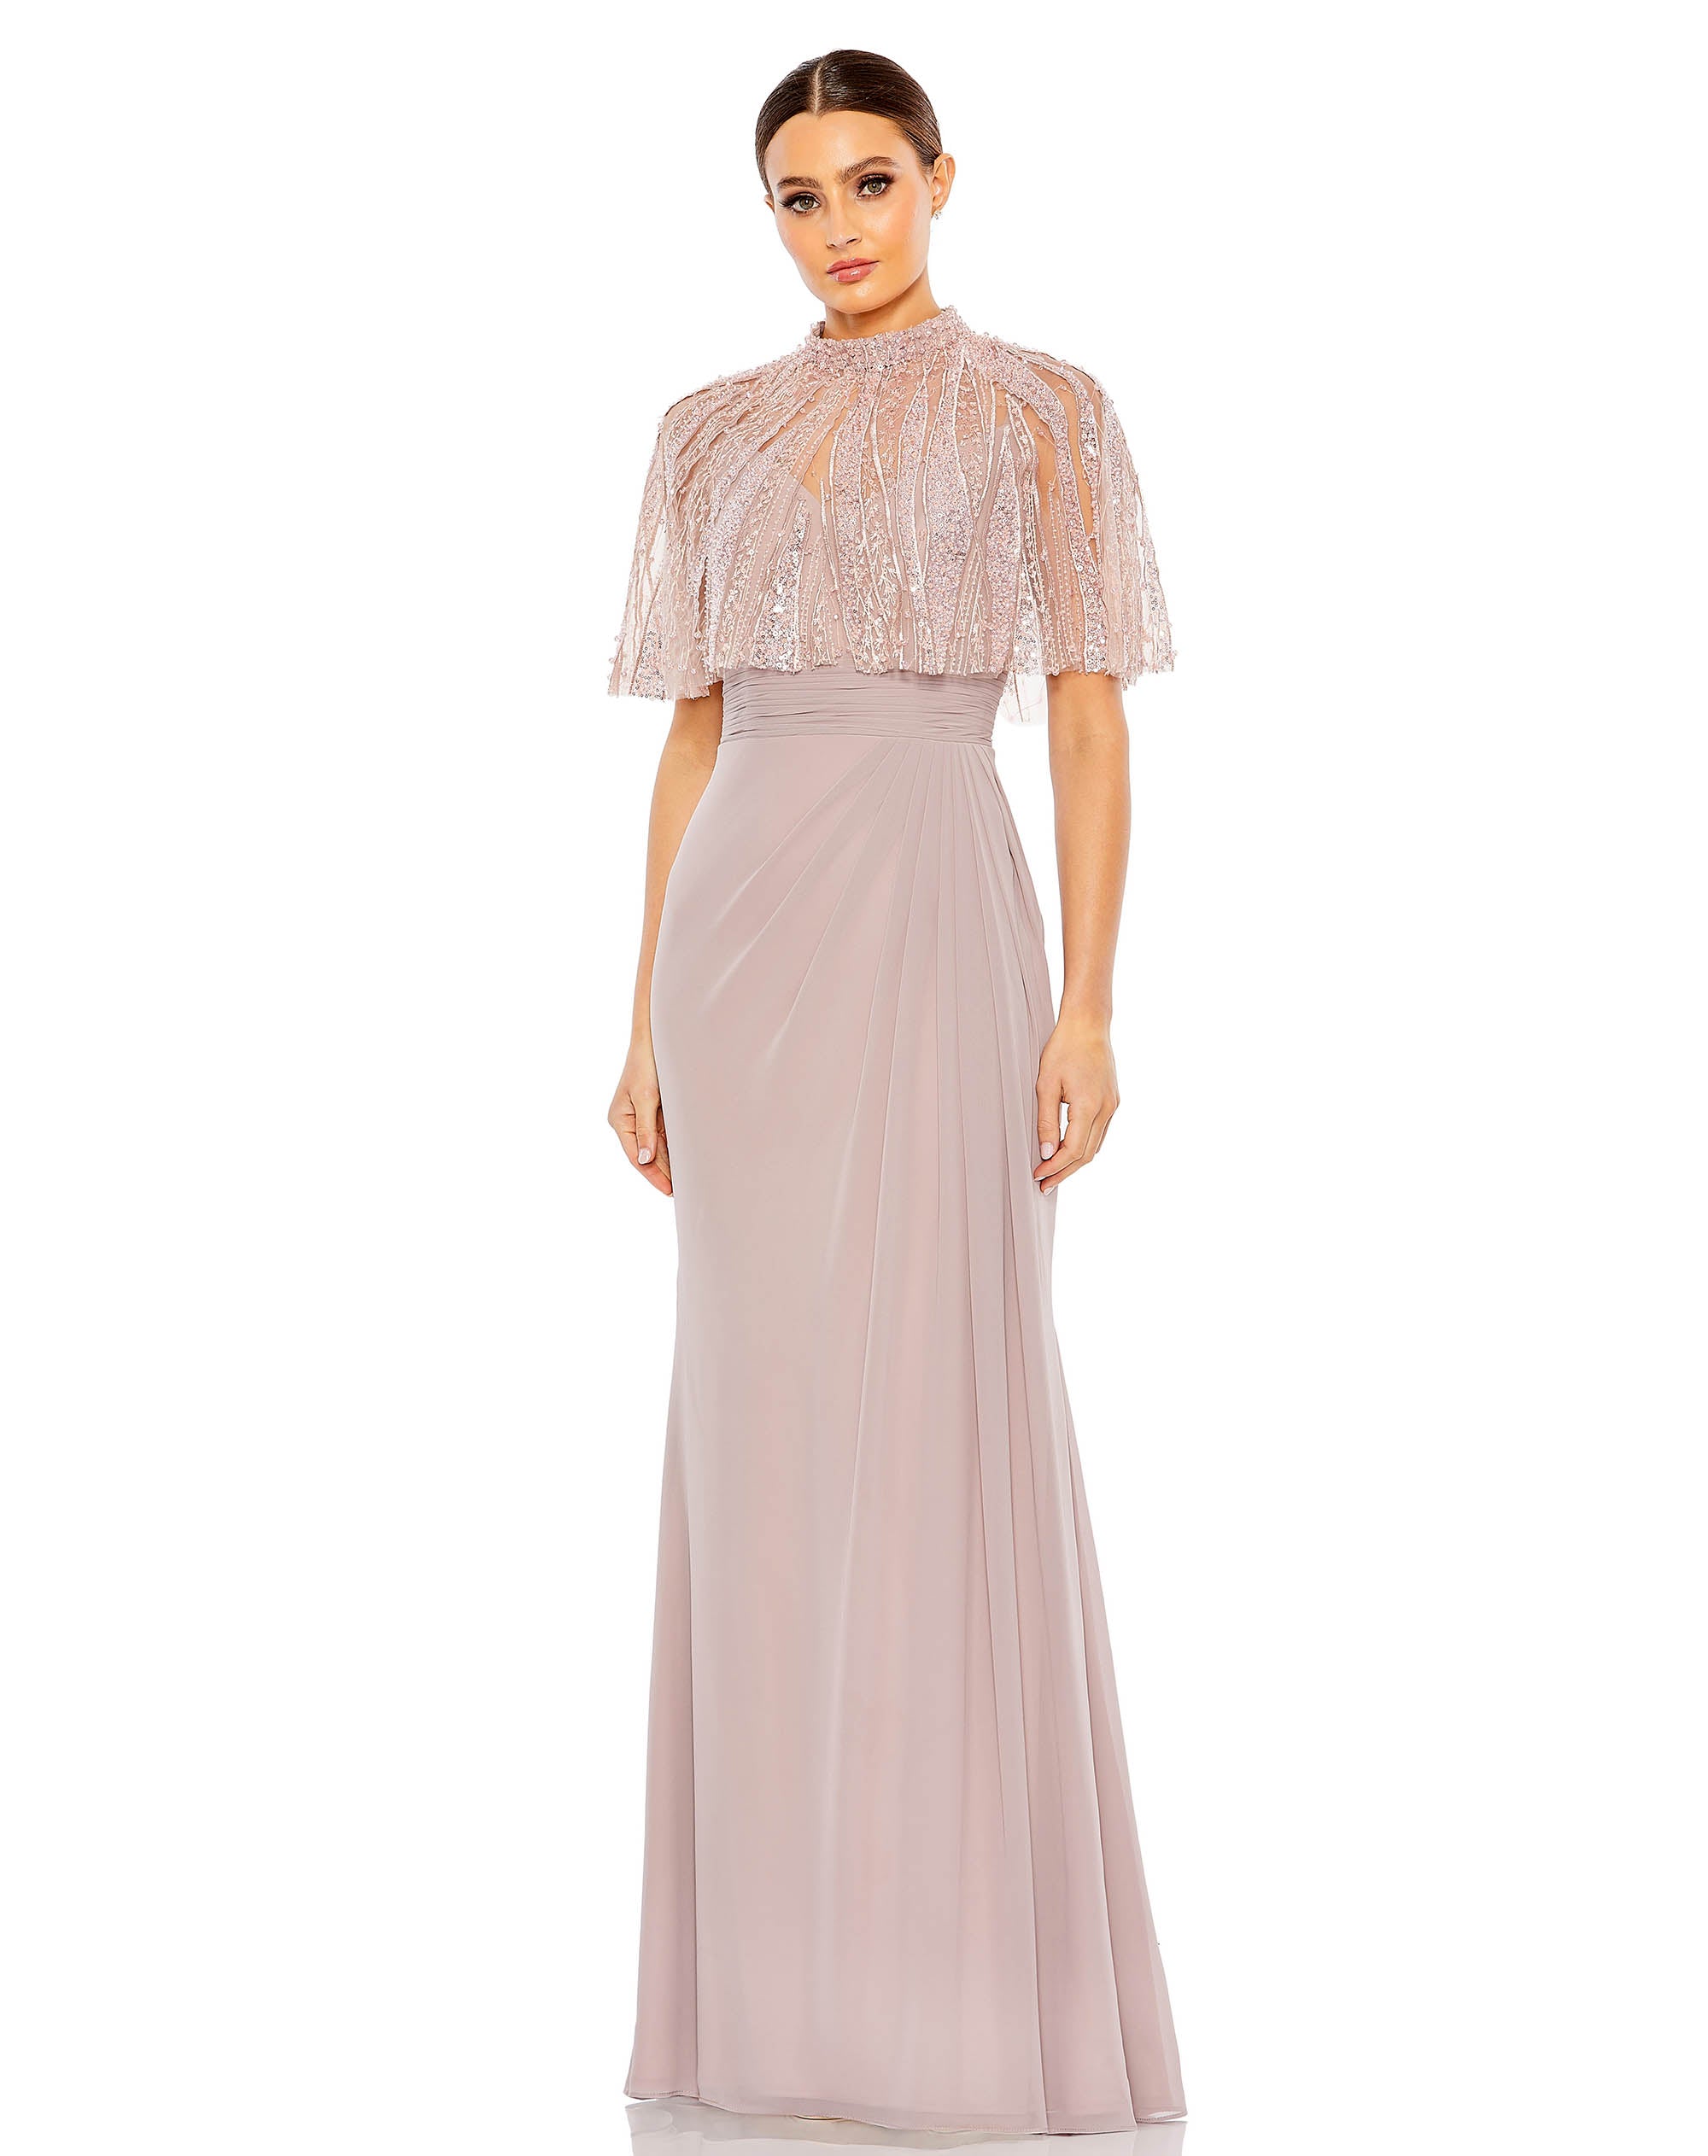 Sleeveless Gown With Embellished Cape